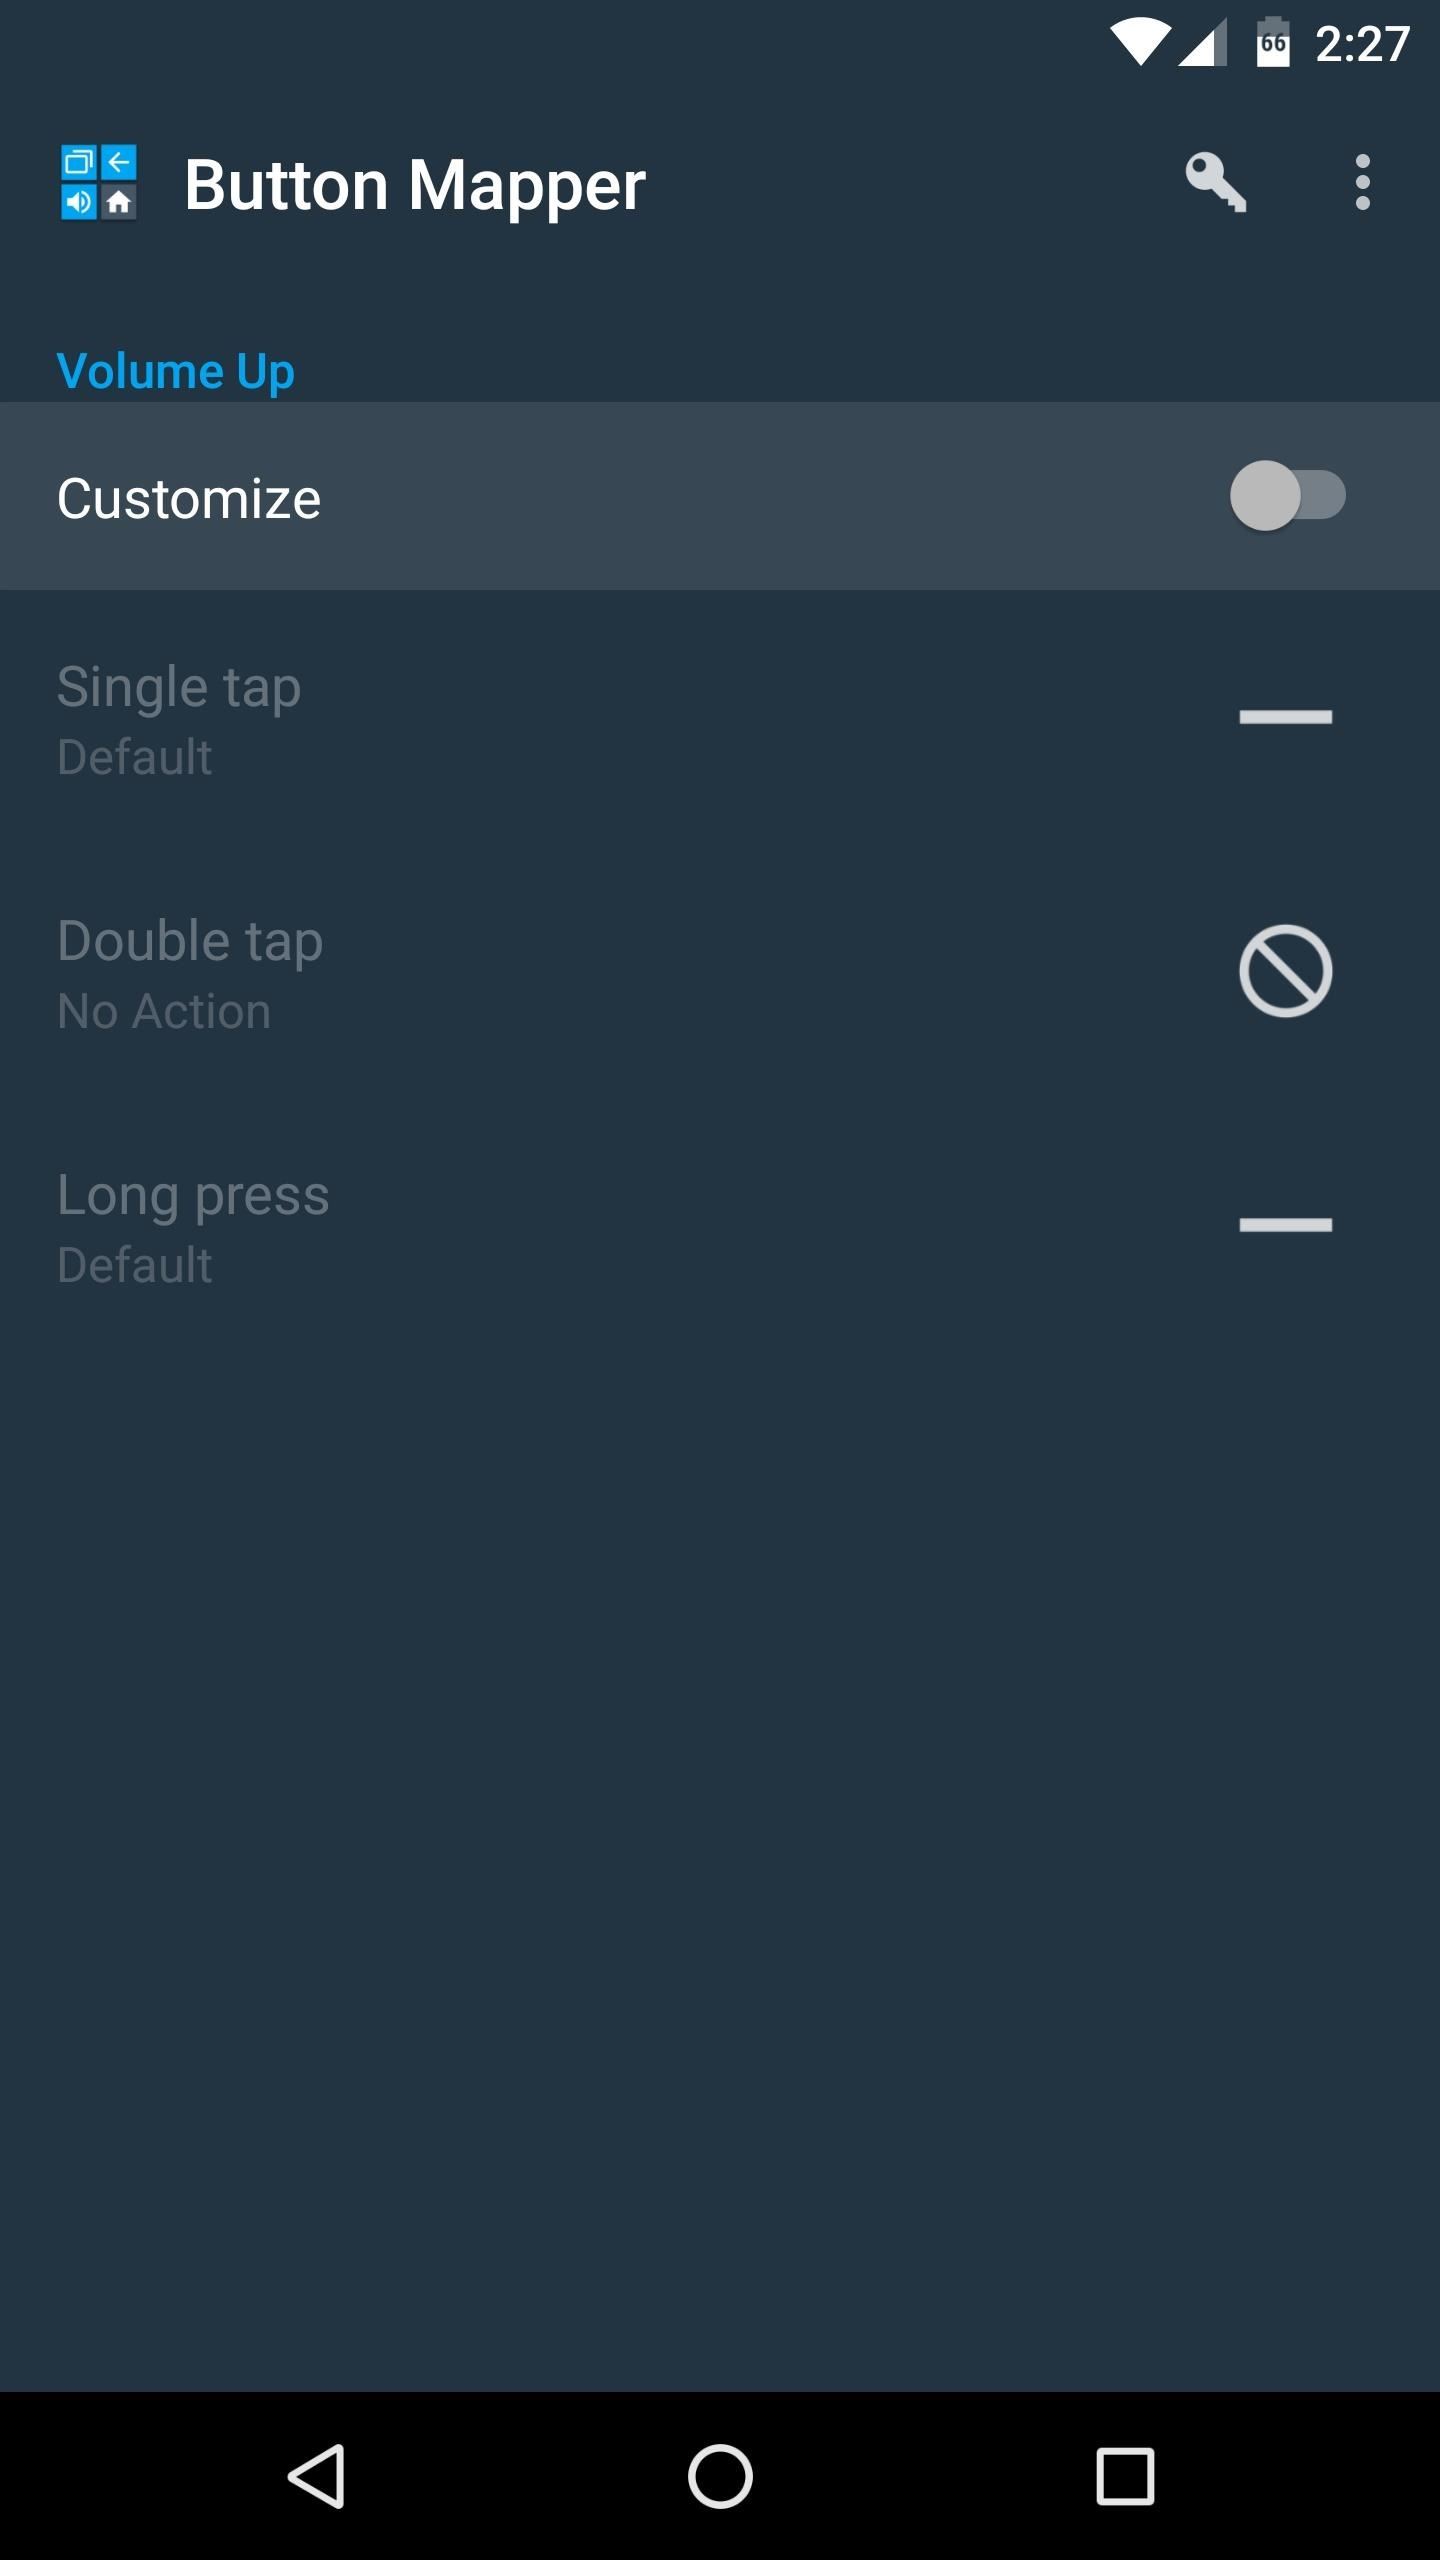 Turn Your Android's Buttons into Shortcuts for Almost Anything